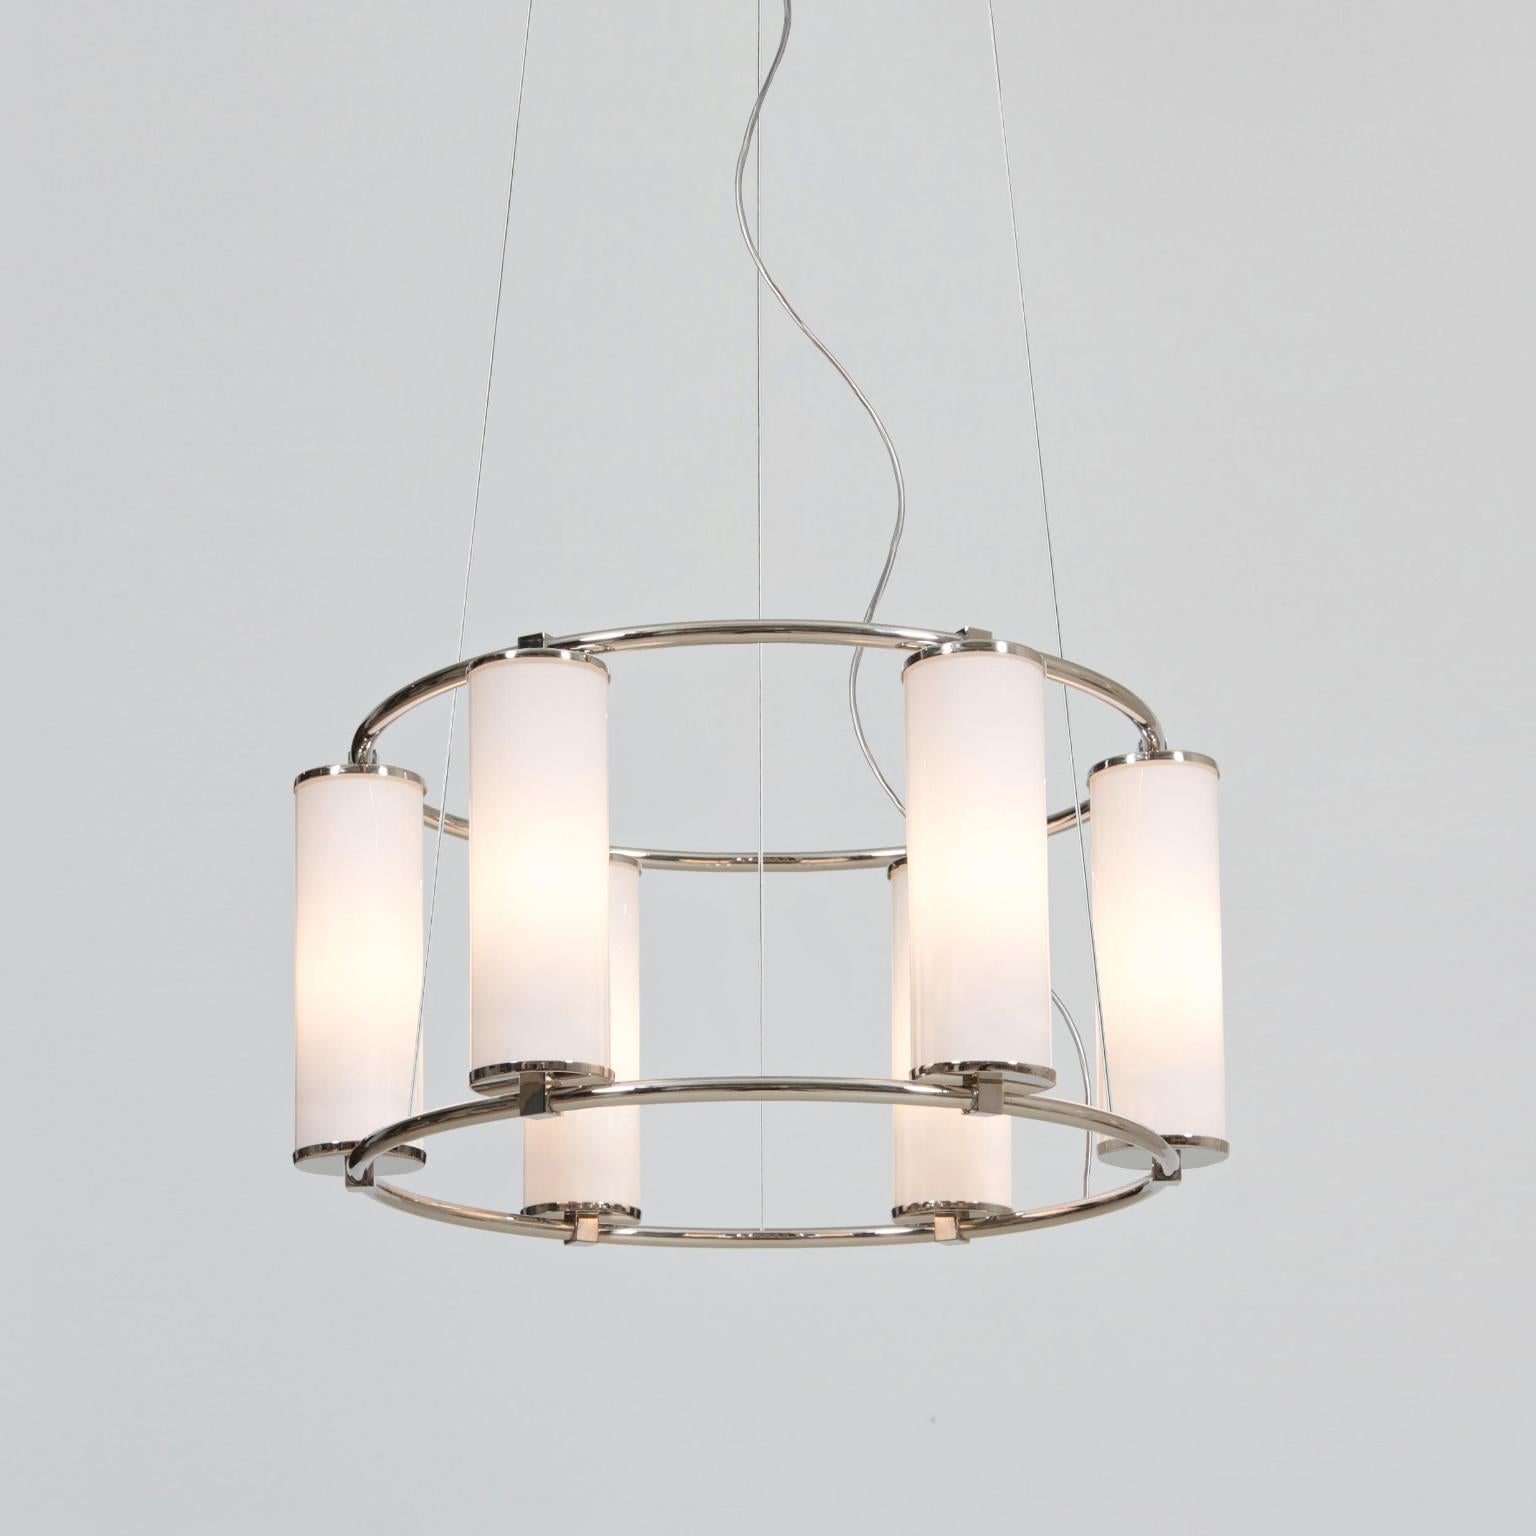 Modernist circular six-light 'Olympia' chandelier. Nickel-plated brass and opaline glass cylinders, manufactured by GMD Berlin, 2018.

Technical details: 6 sockets E 27, soffitten-lights, pendant length is variable.